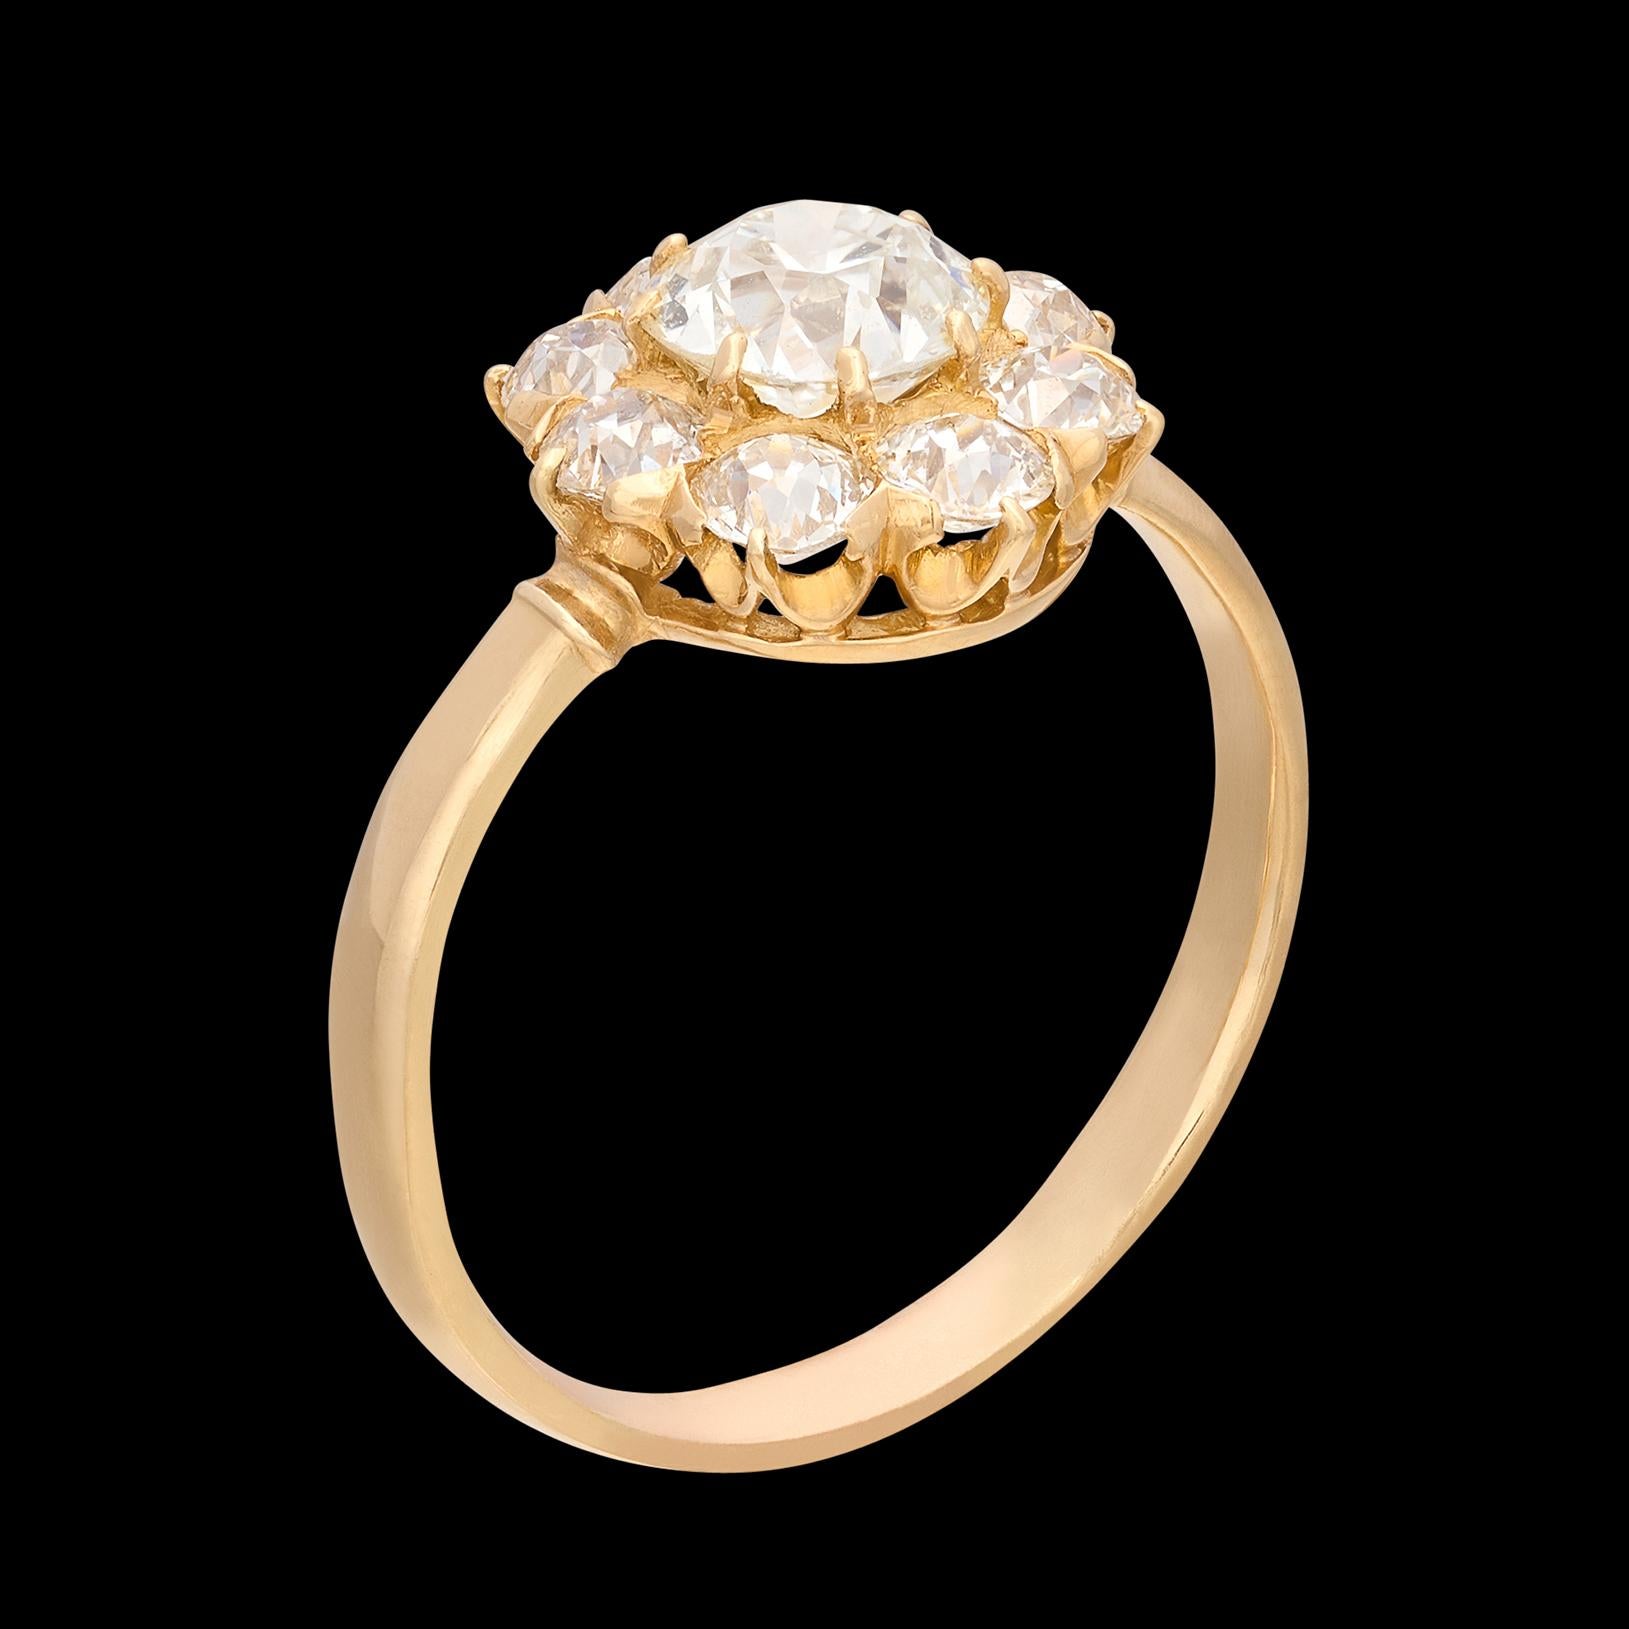 18k Gold Antique Old European Cut Diamond Ring For Sale 1